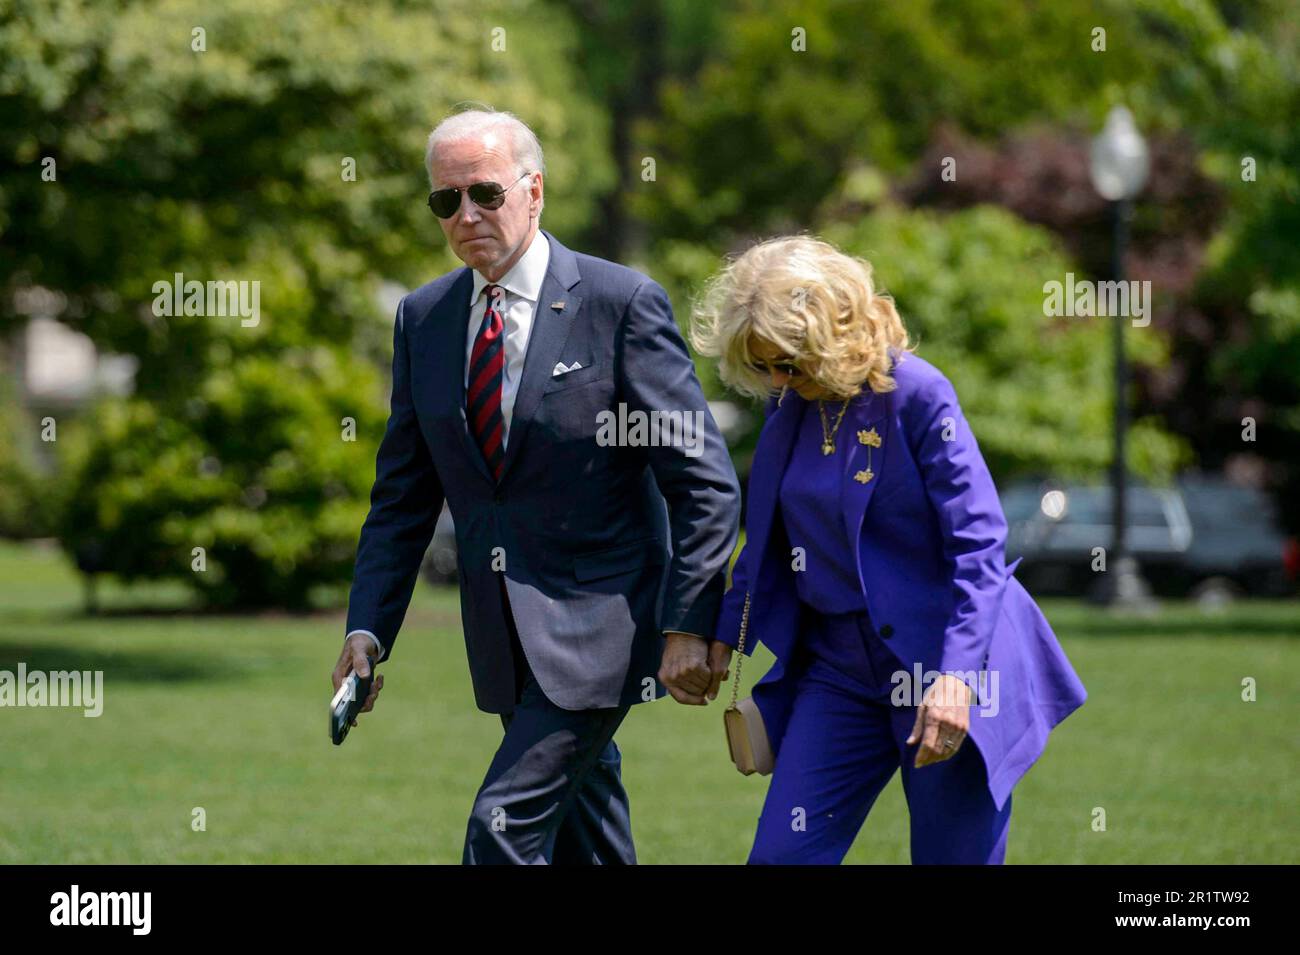 Washington, United States. 15th May, 2023. President Joe Biden and First Lady Jill Biden walk across the South Lawn after exiting Marine One at the White House in Washington, DC on Monday, May 15, 2023. The President and First Lady are returning from a weekend in Rehoboth, Delaware. Photo by Bonnie Cash/Pool/ABACAPRESS.COM Credit: Abaca Press/Alamy Live News Stock Photo